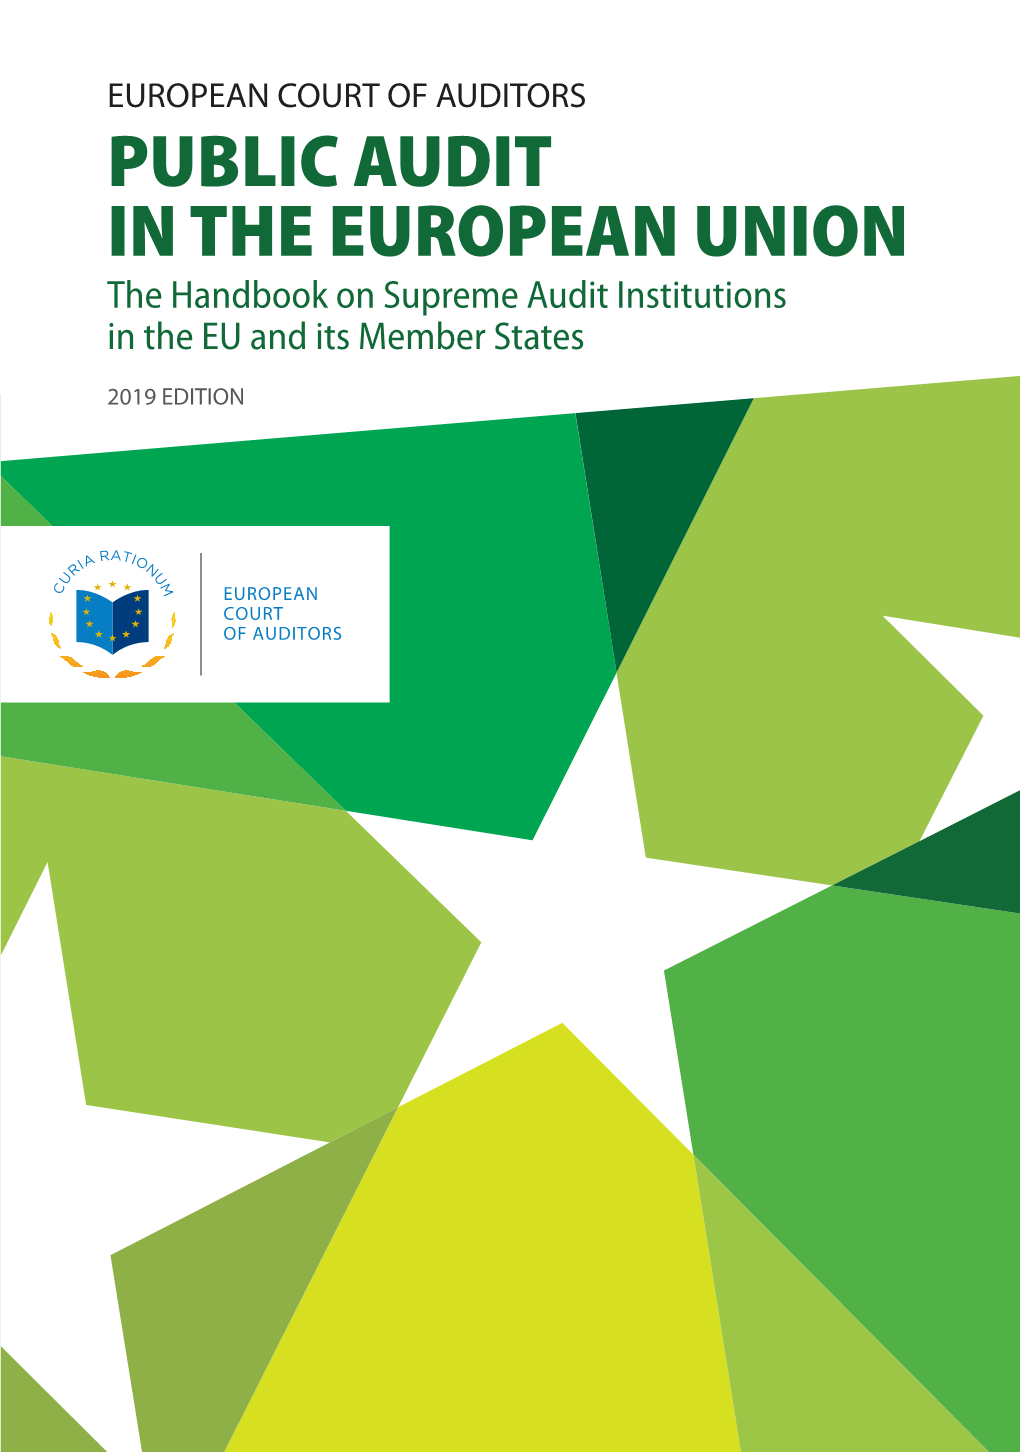 PUBLIC AUDIT in the EUROPEAN UNION the Handbook on Supreme Audit Institutions in the EU and Its Member States